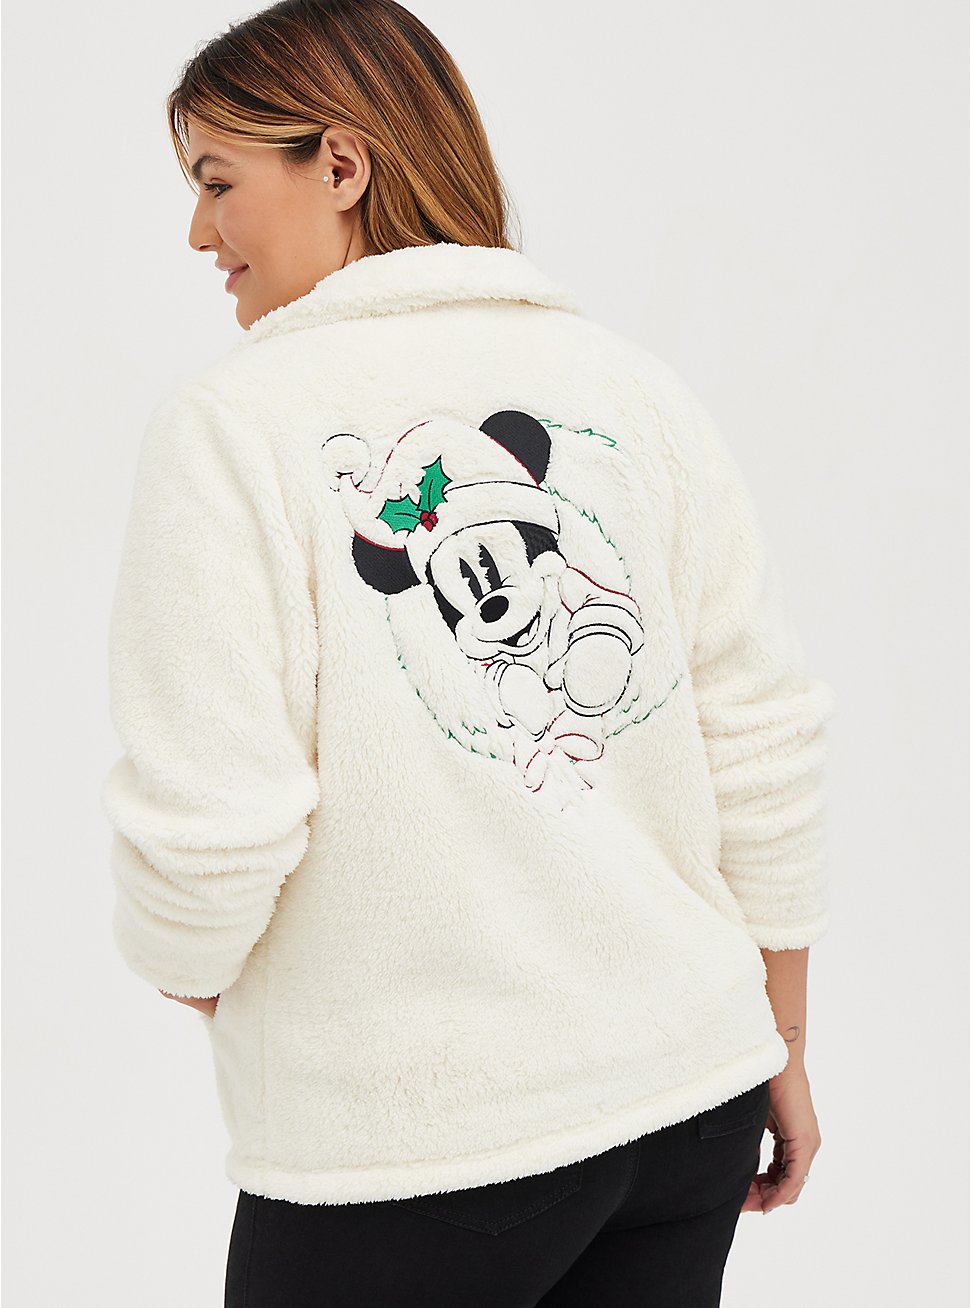 Faux Shearling Jacket - Disney Mickey Mouse Holiday White, WINTER WHITE, hi-res